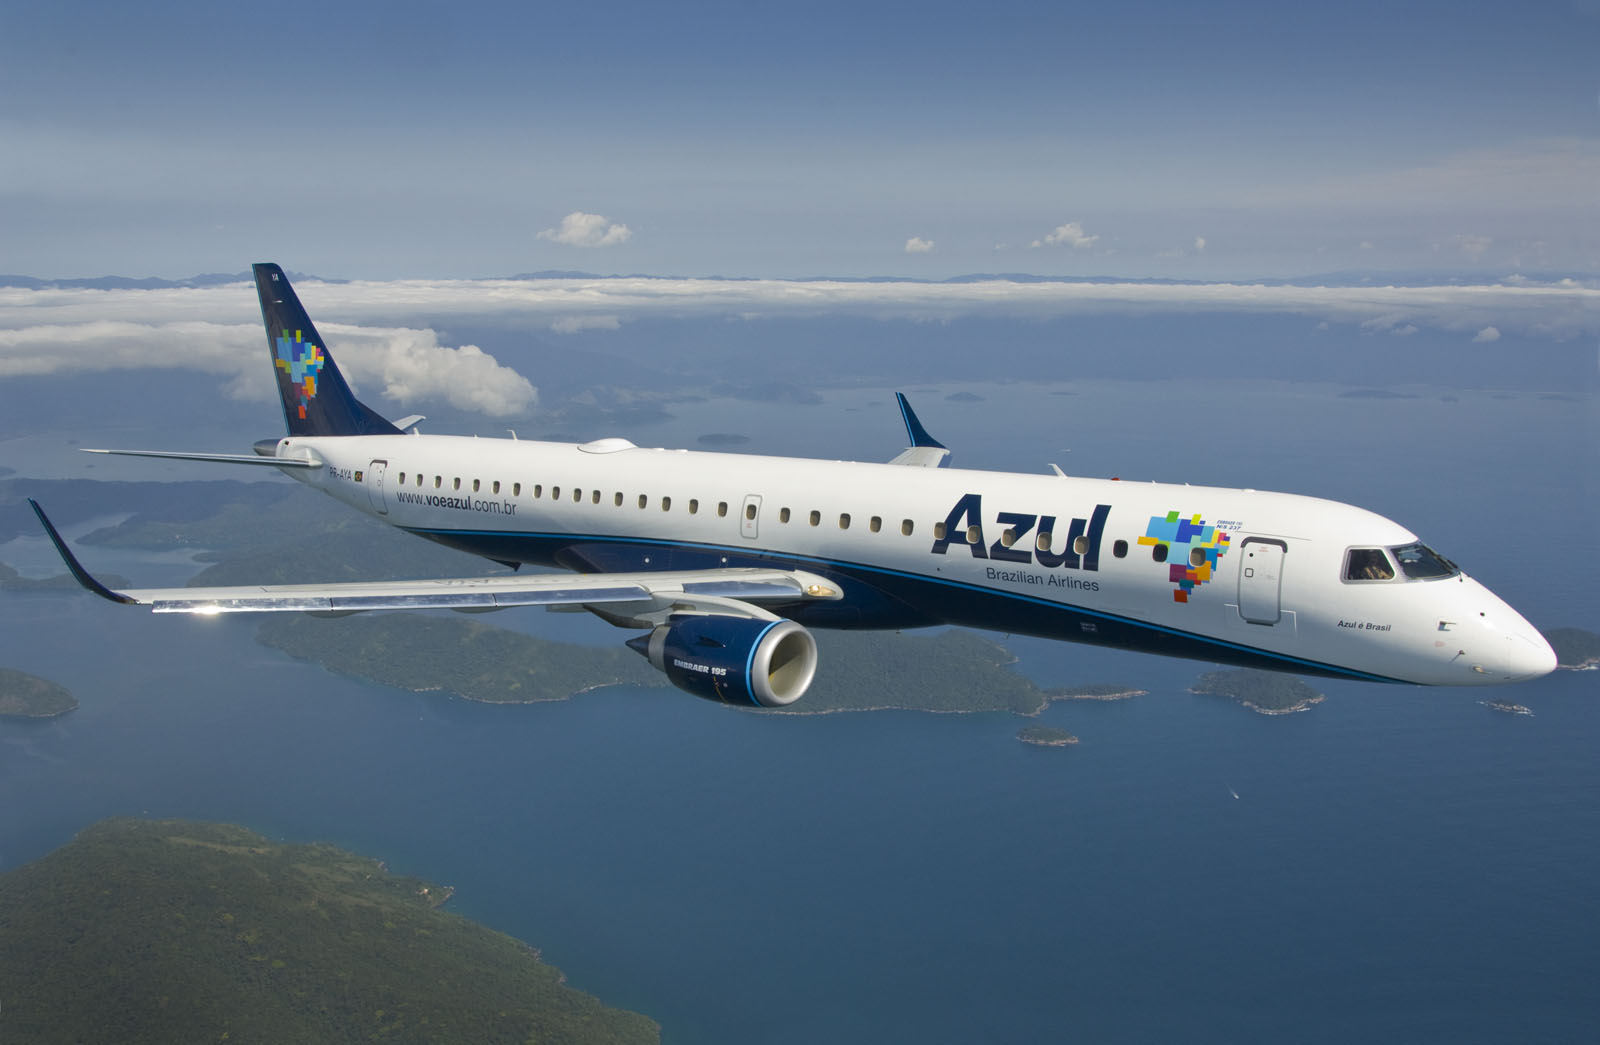 Azul's main hub is the Campinas airport in São Paulo state. (Photo internet reproduction)